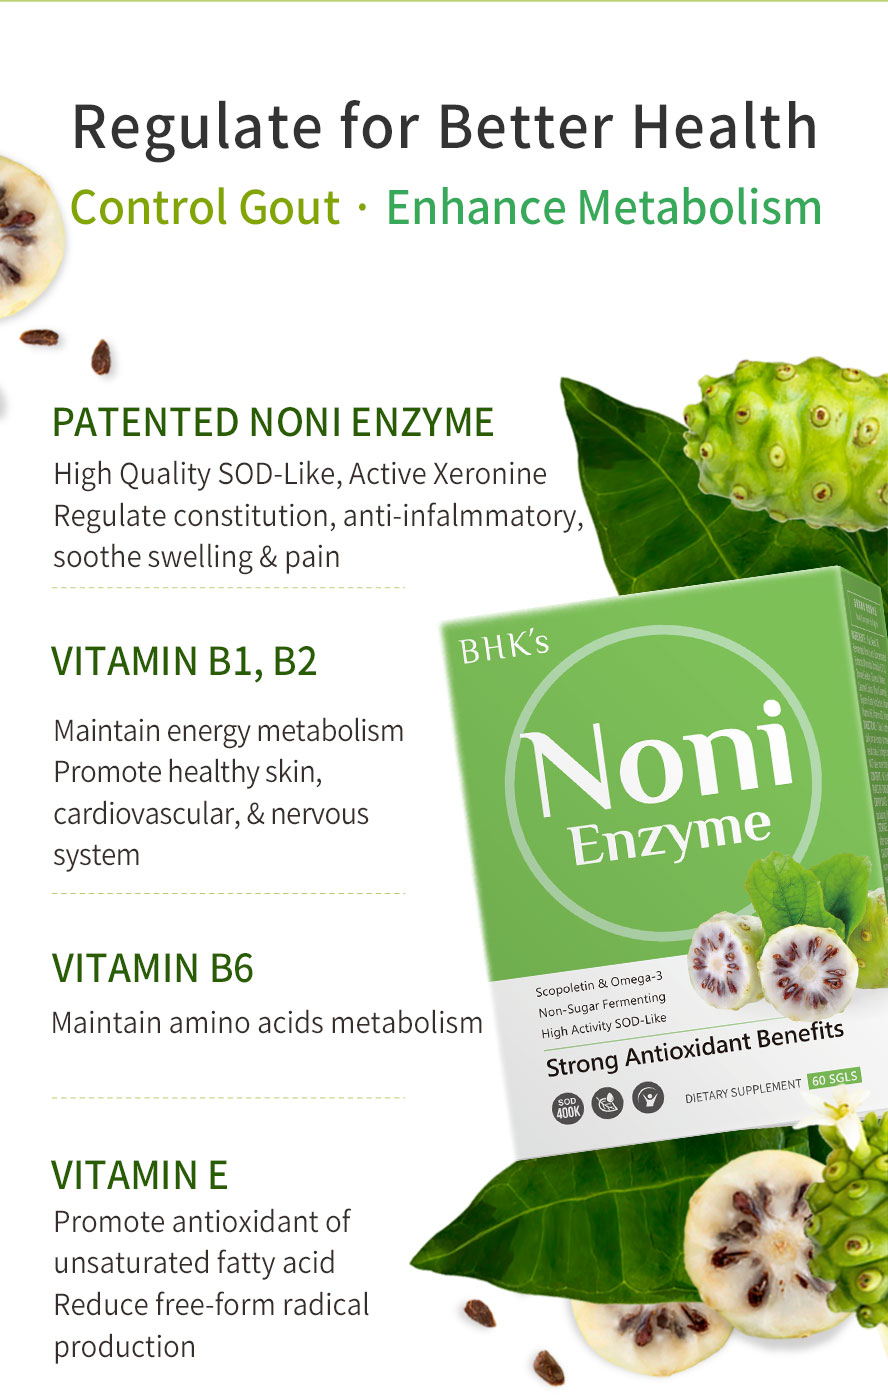 BHK's Noni Enzyme Softgels contains patented noni enzyme and several vitamins to control gout, enhance metabolism, anti-inflammatory, and act as antioxidant.